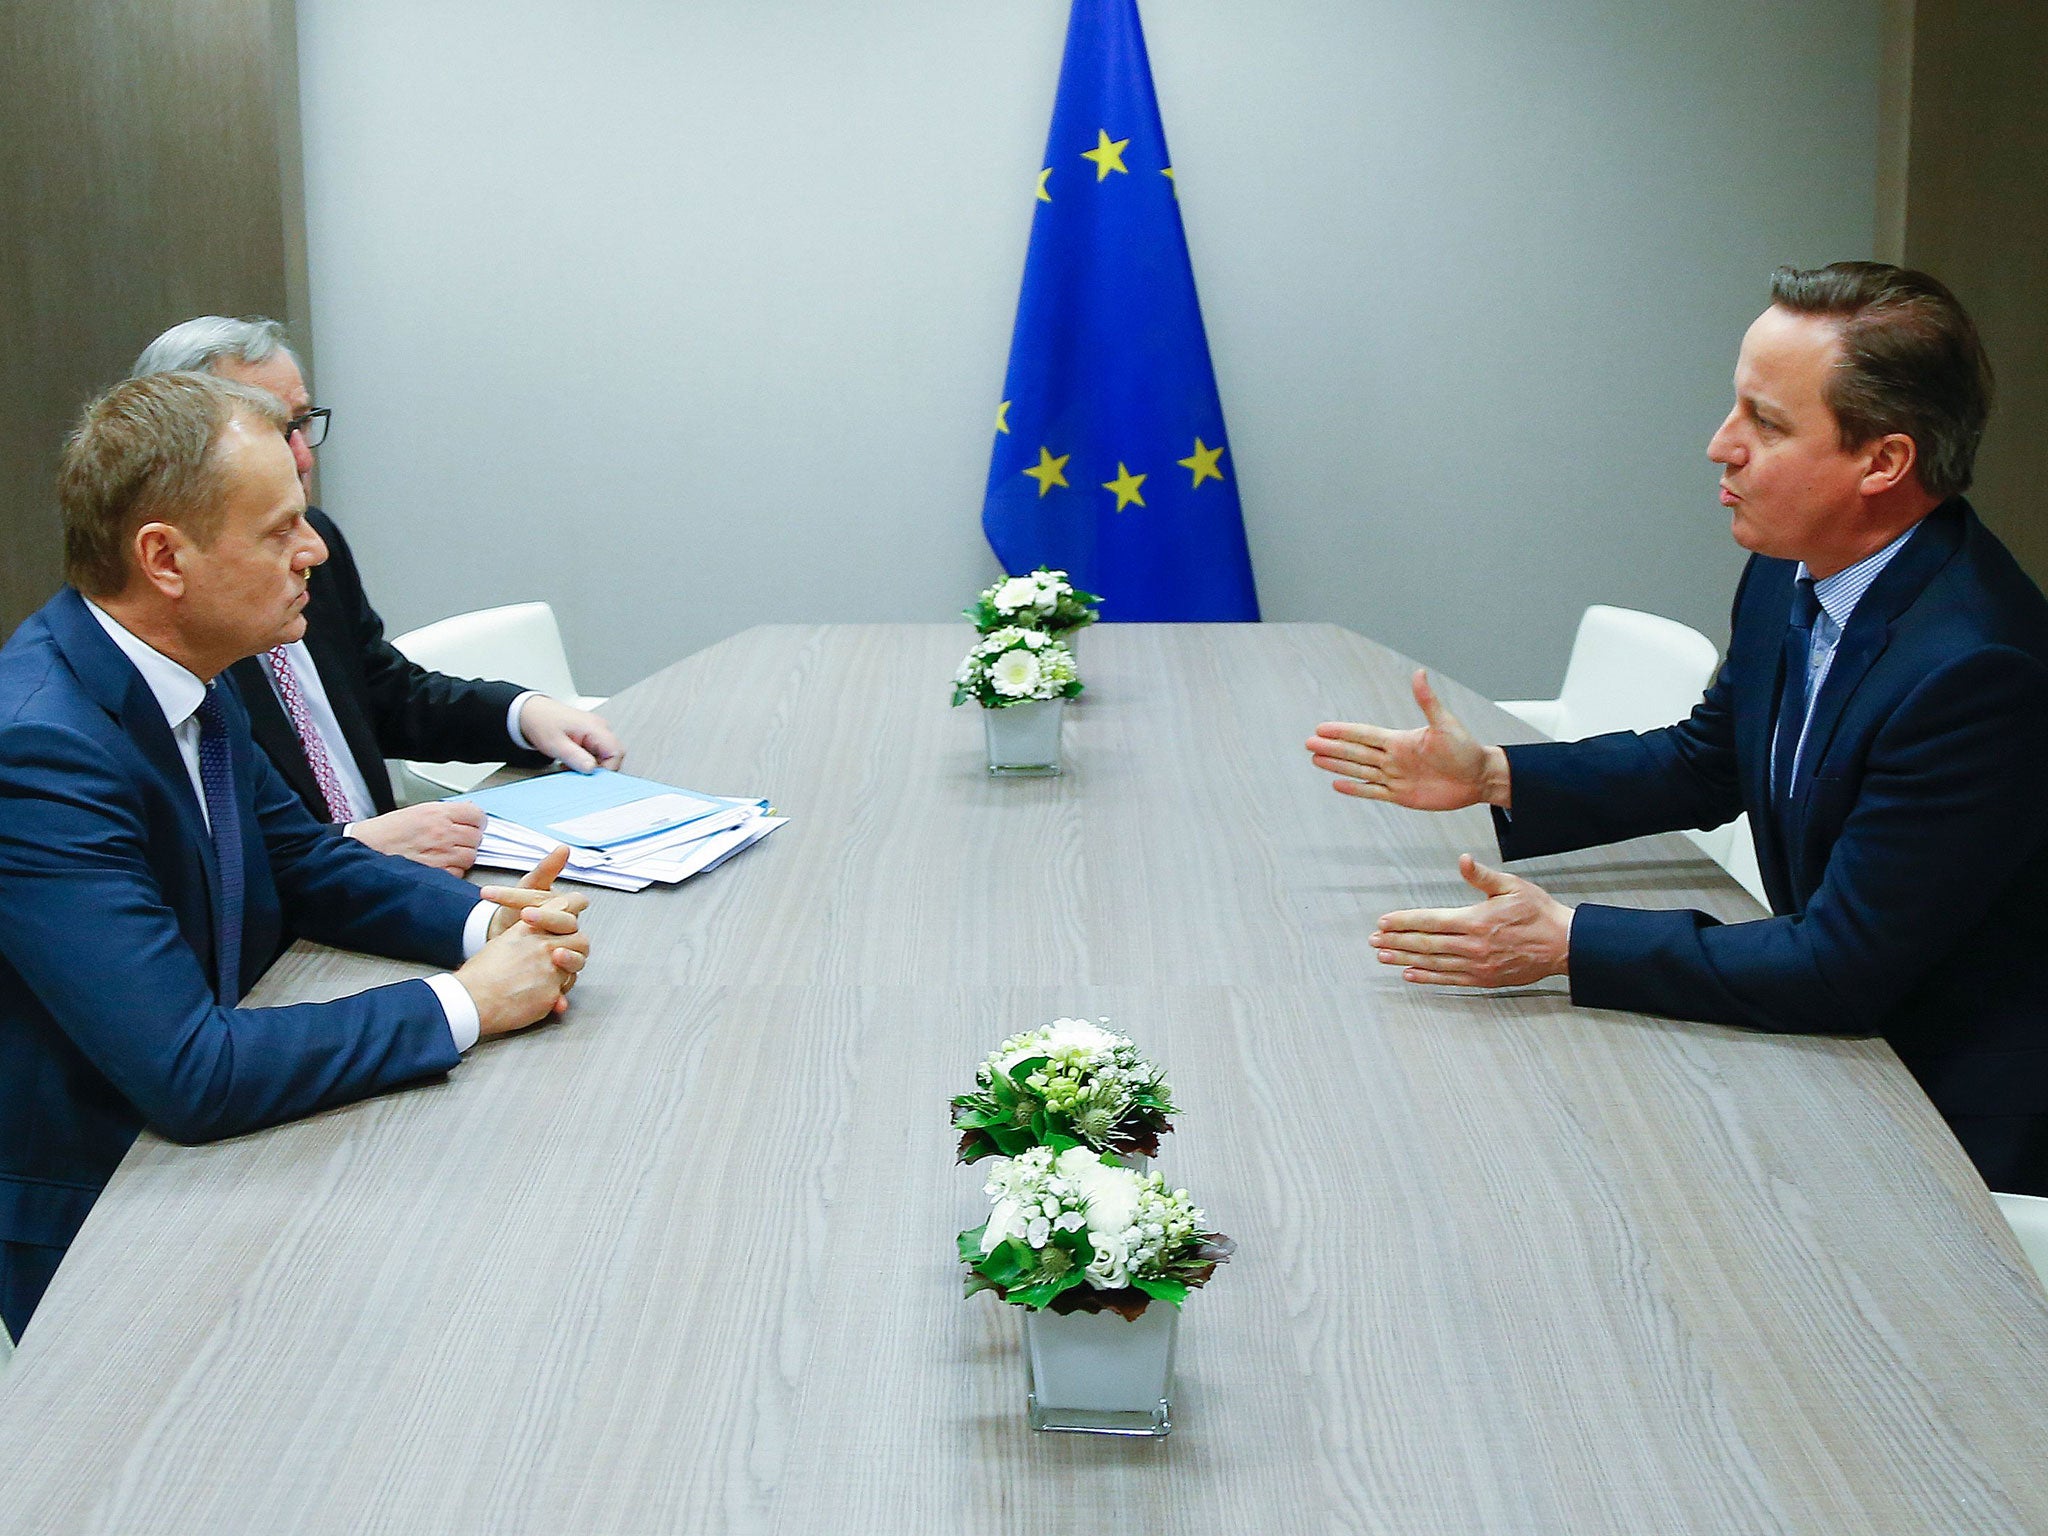 David Cameron, right, attends a meeting with and European Council President Donald Tusk, left, and European Commission President Jean Claude Juncker, center, during a European Union leaders summit